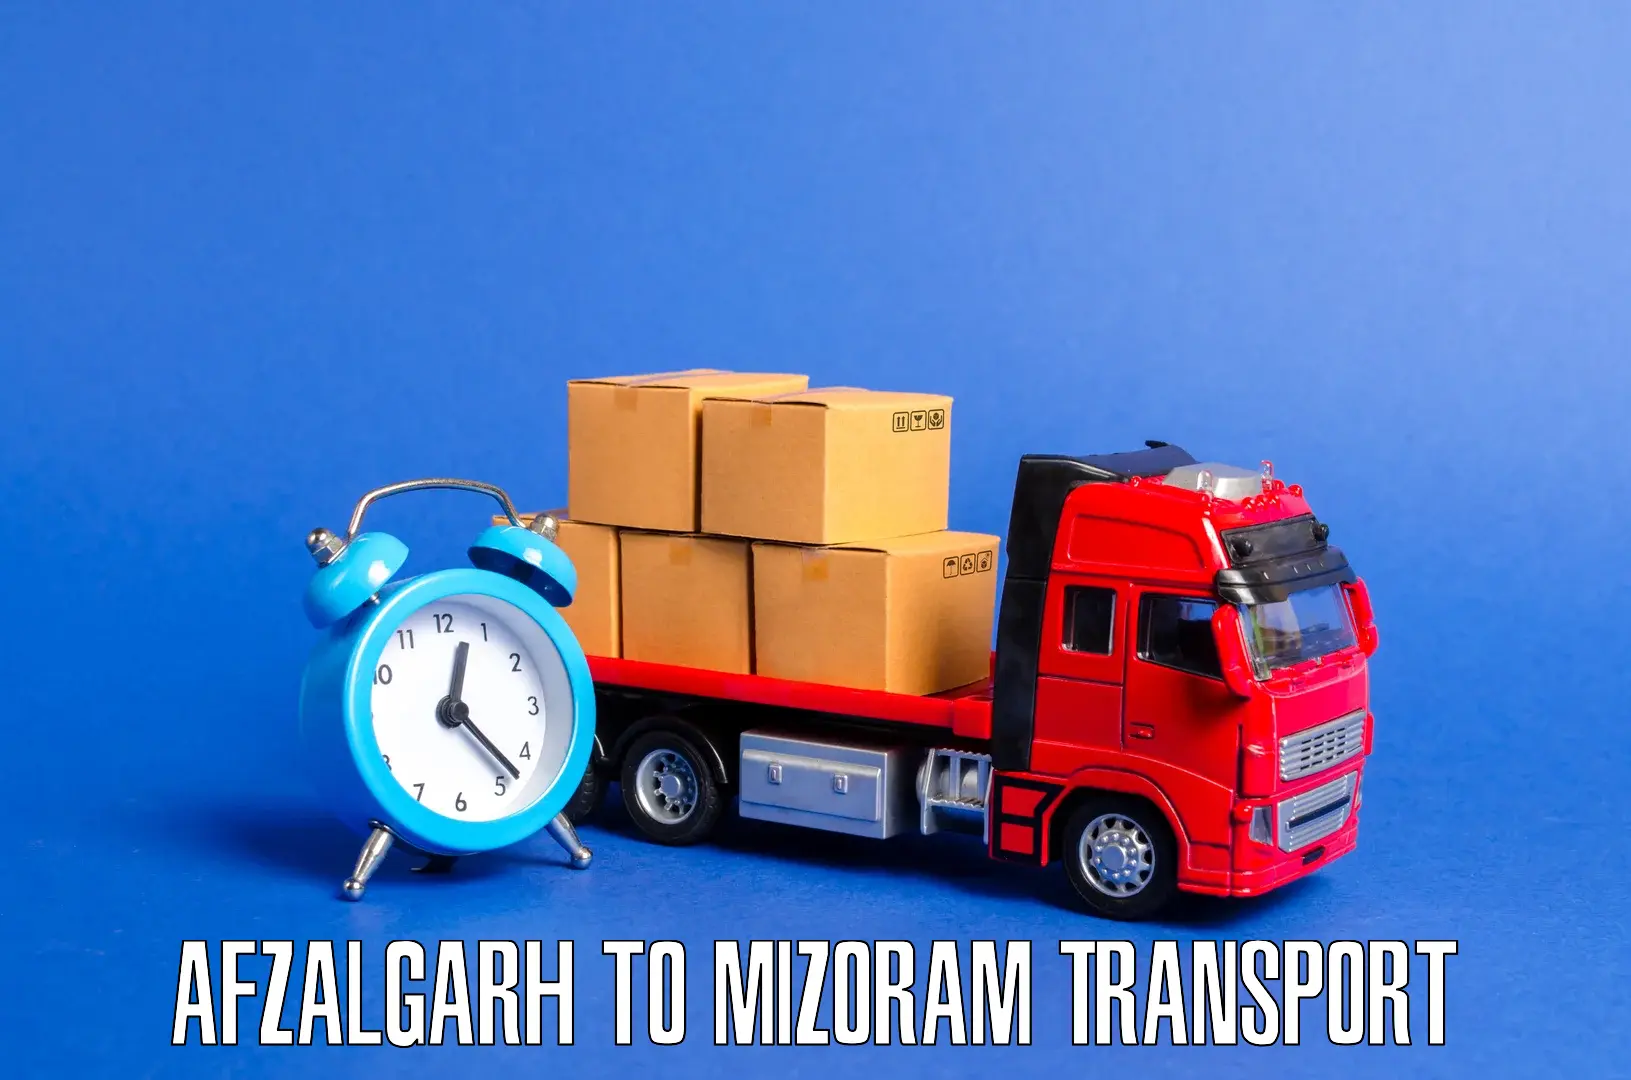 Delivery service Afzalgarh to Thenzawl